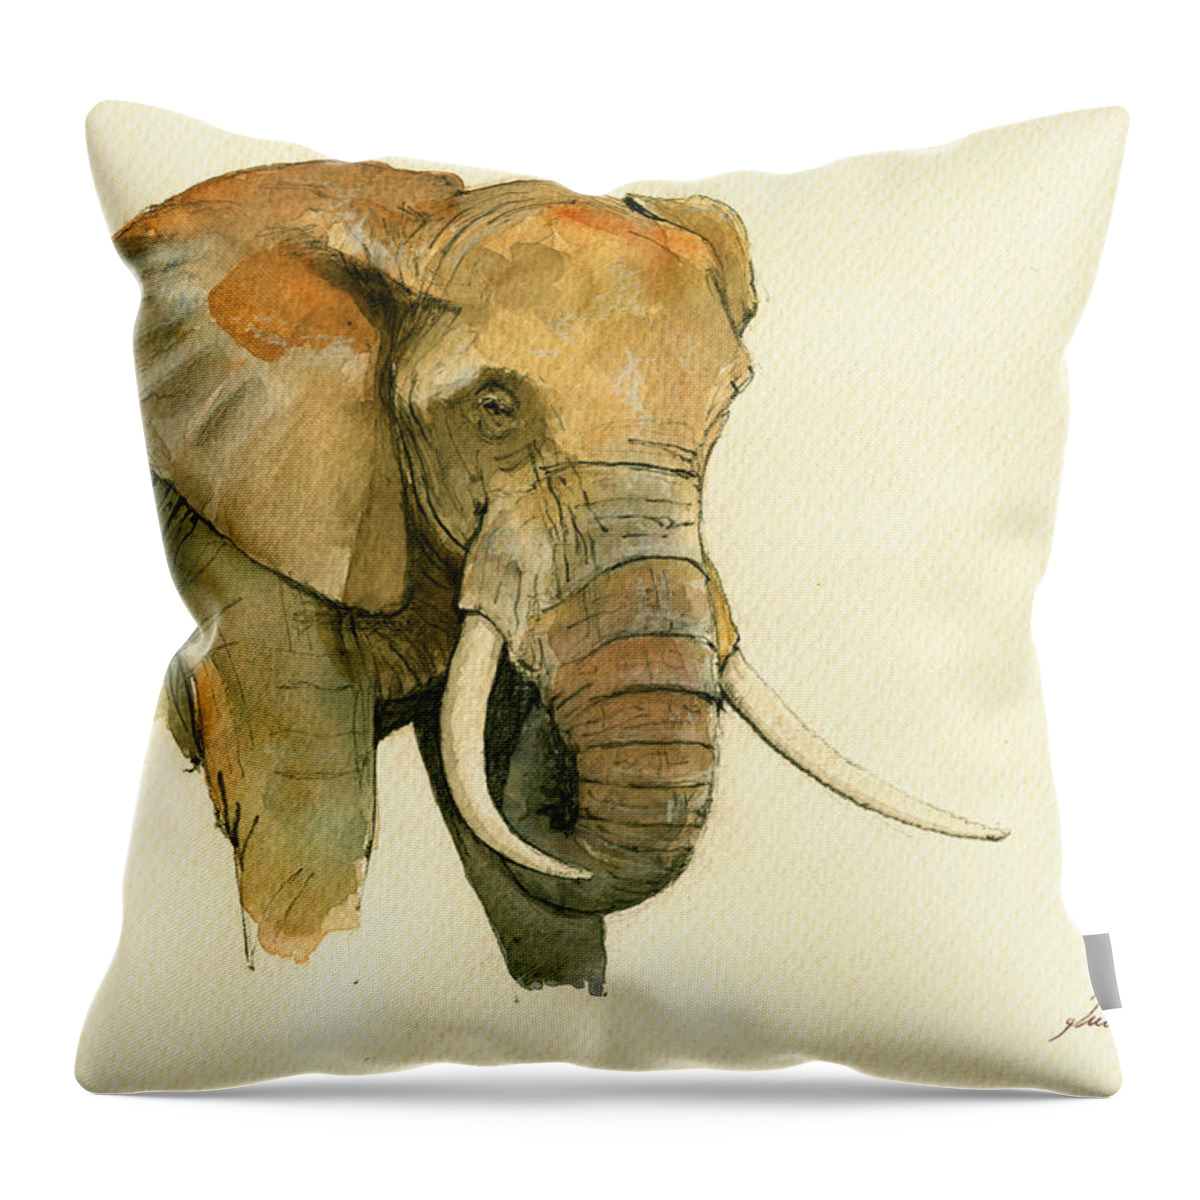  Throw Pillow featuring the painting Elephant painting      by Juan Bosco